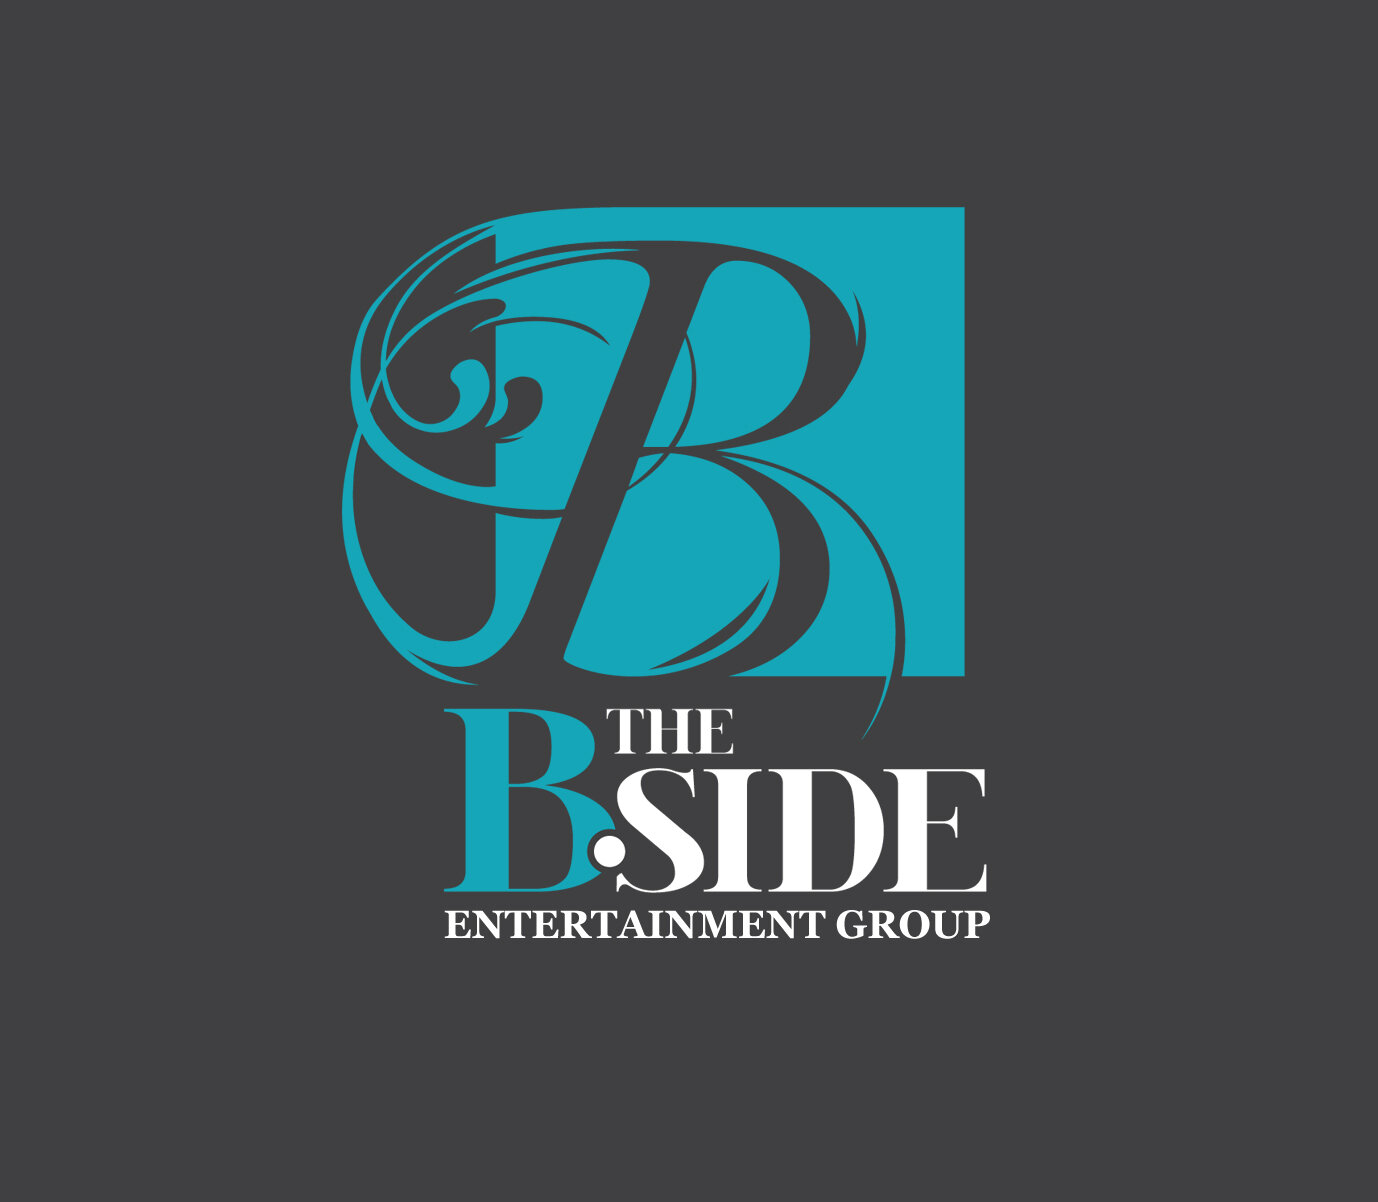 The B-Side Entertainment Group